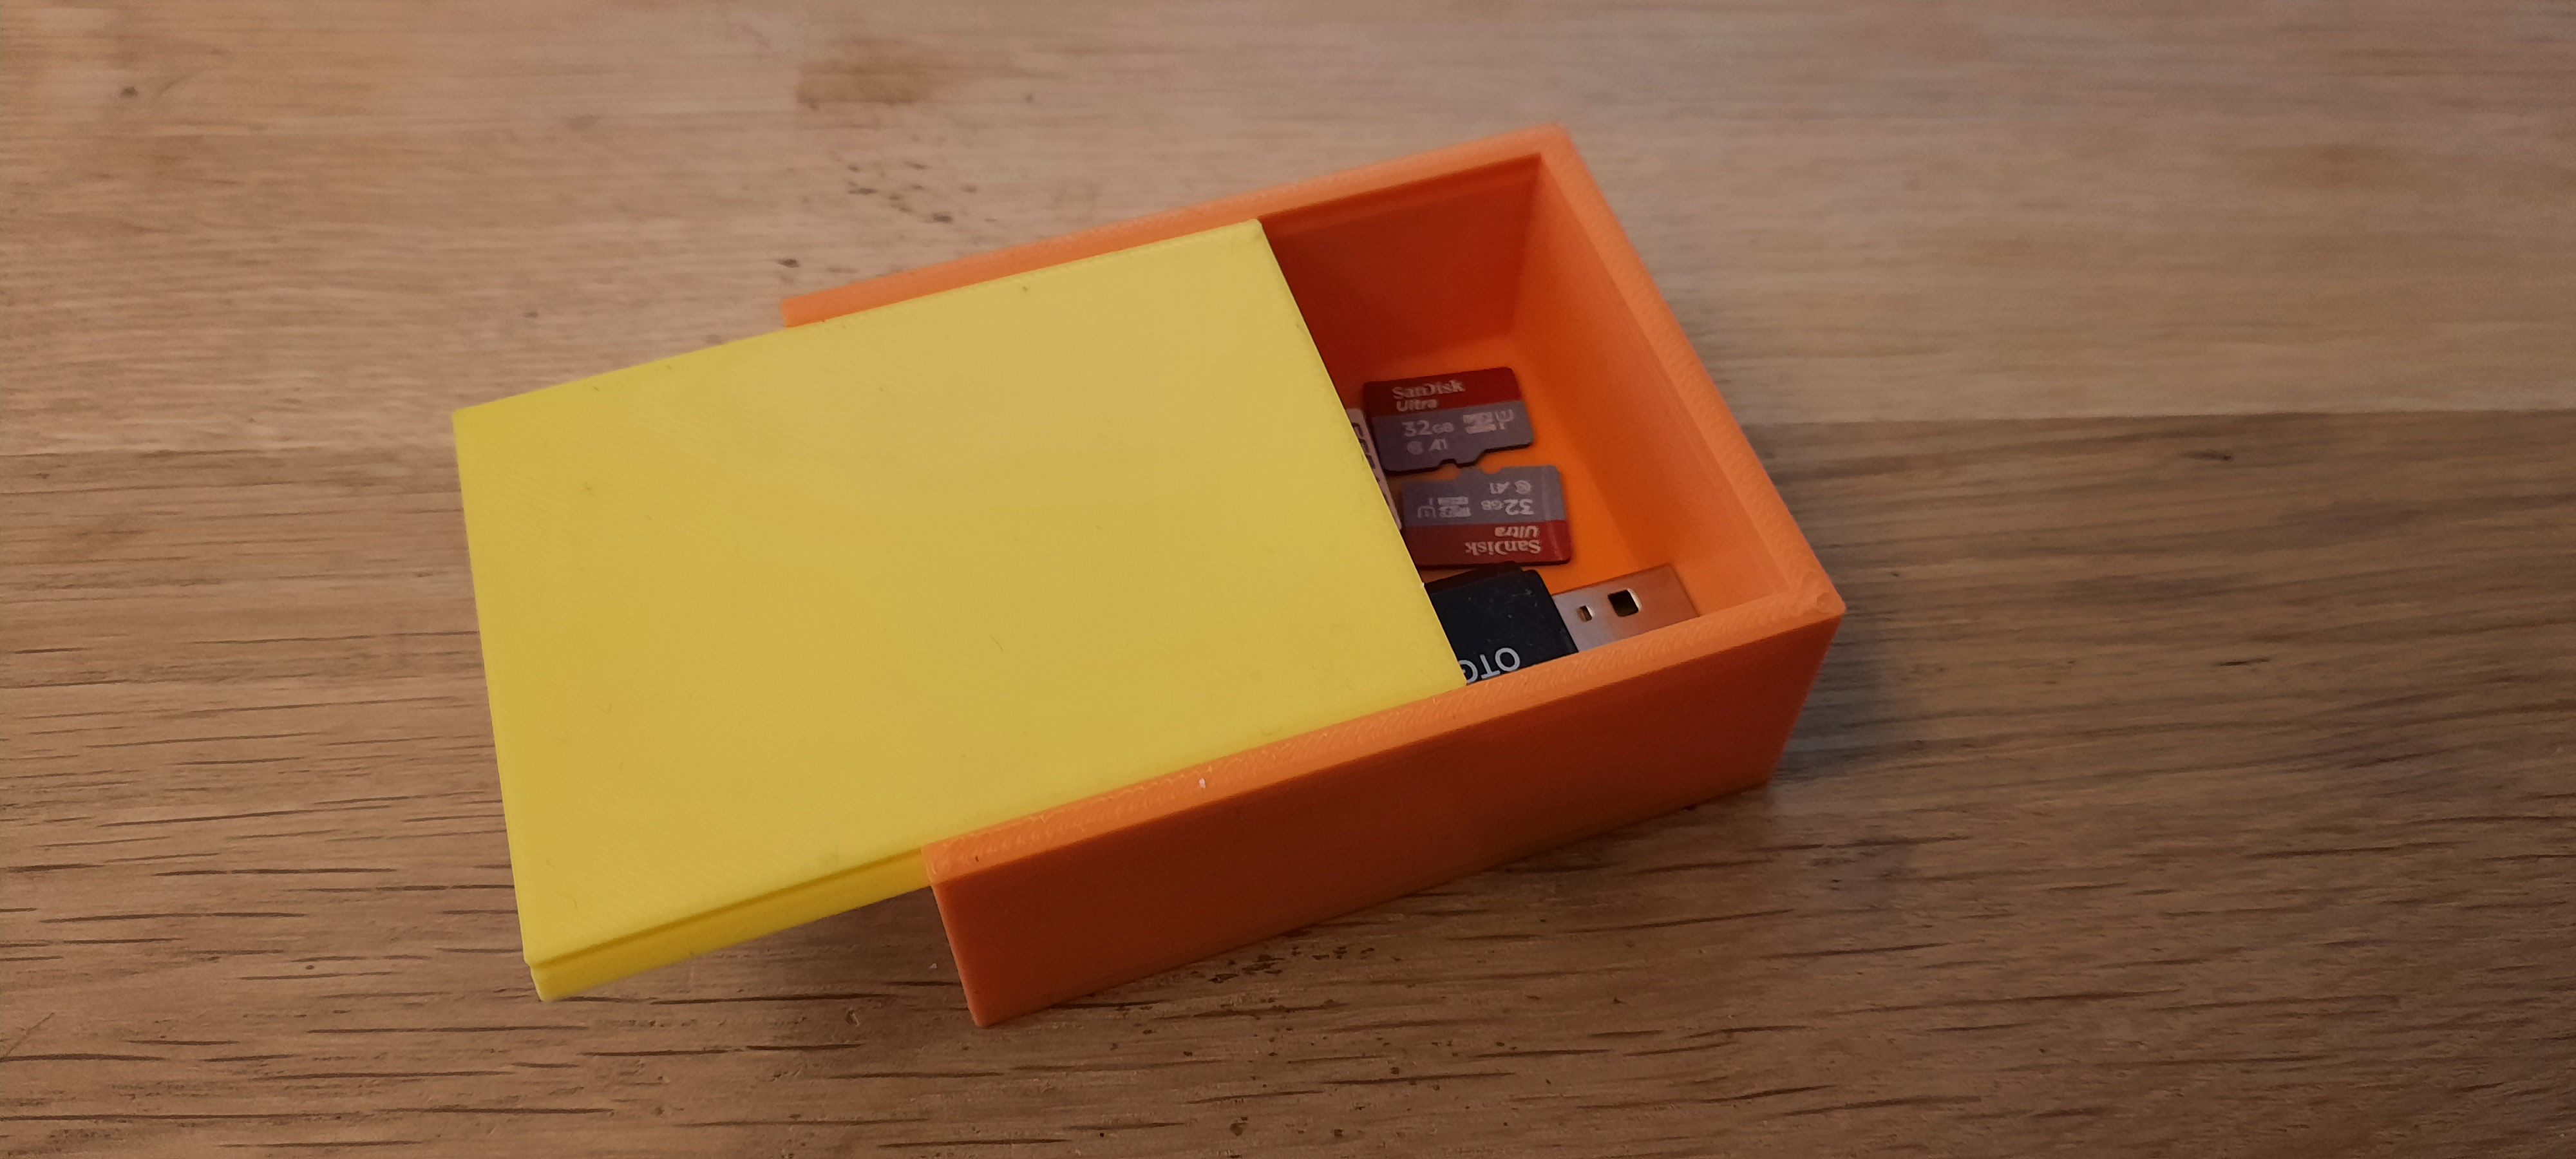 small box with lid